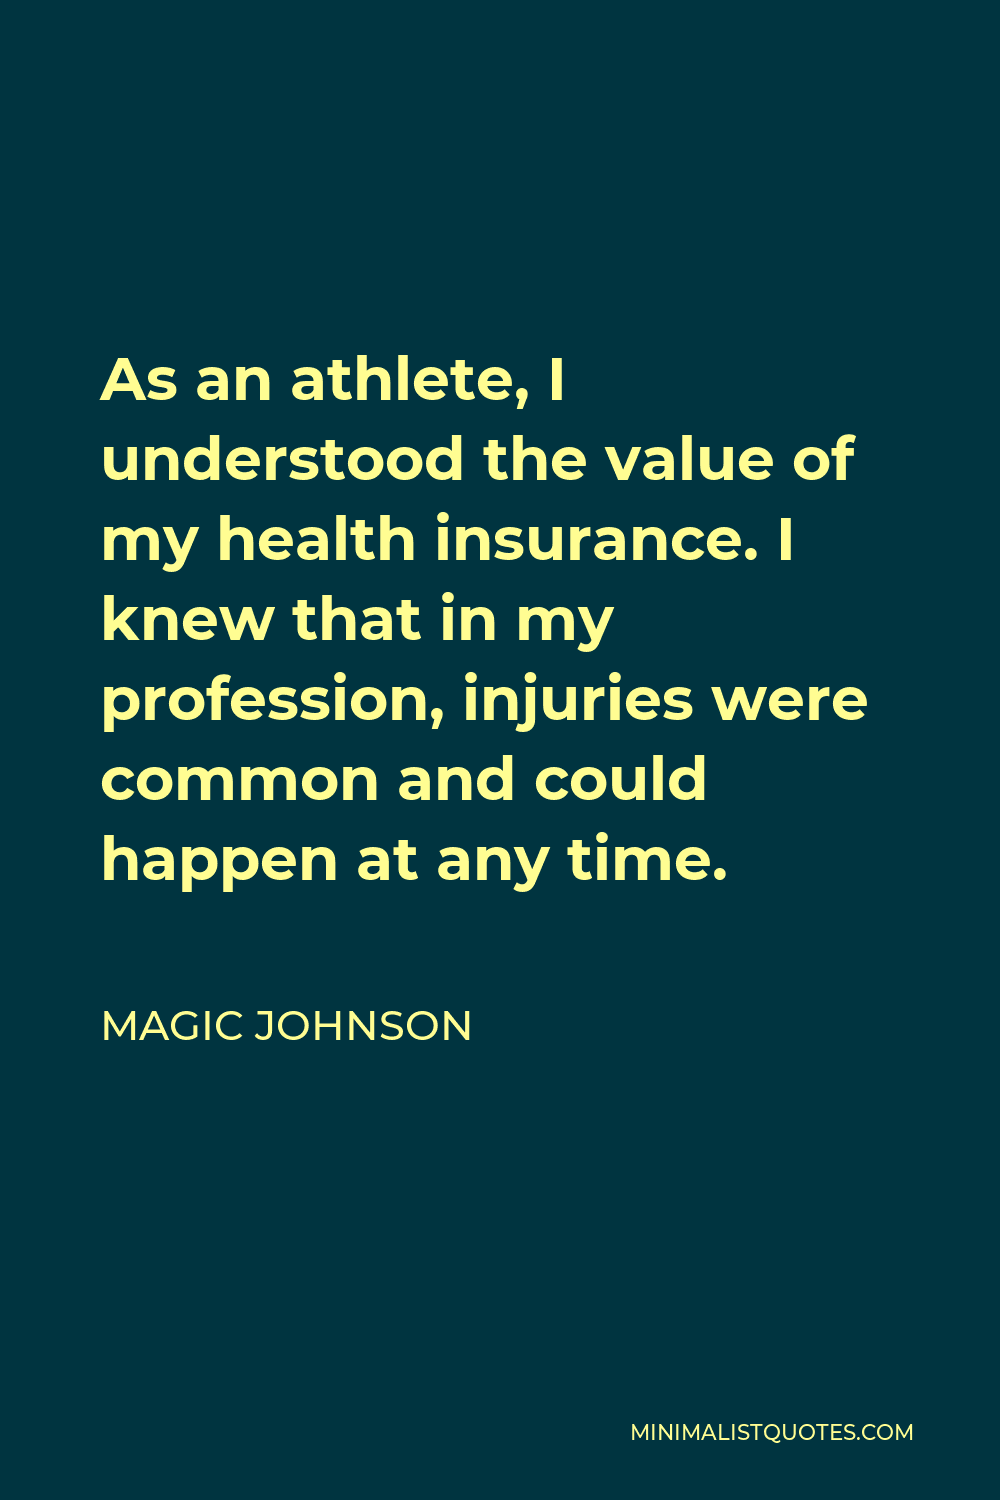 Magic Johnson Quote - As an athlete, I understood the value of my health insurance. I knew that in my profession, injuries were common and could happen at any time.